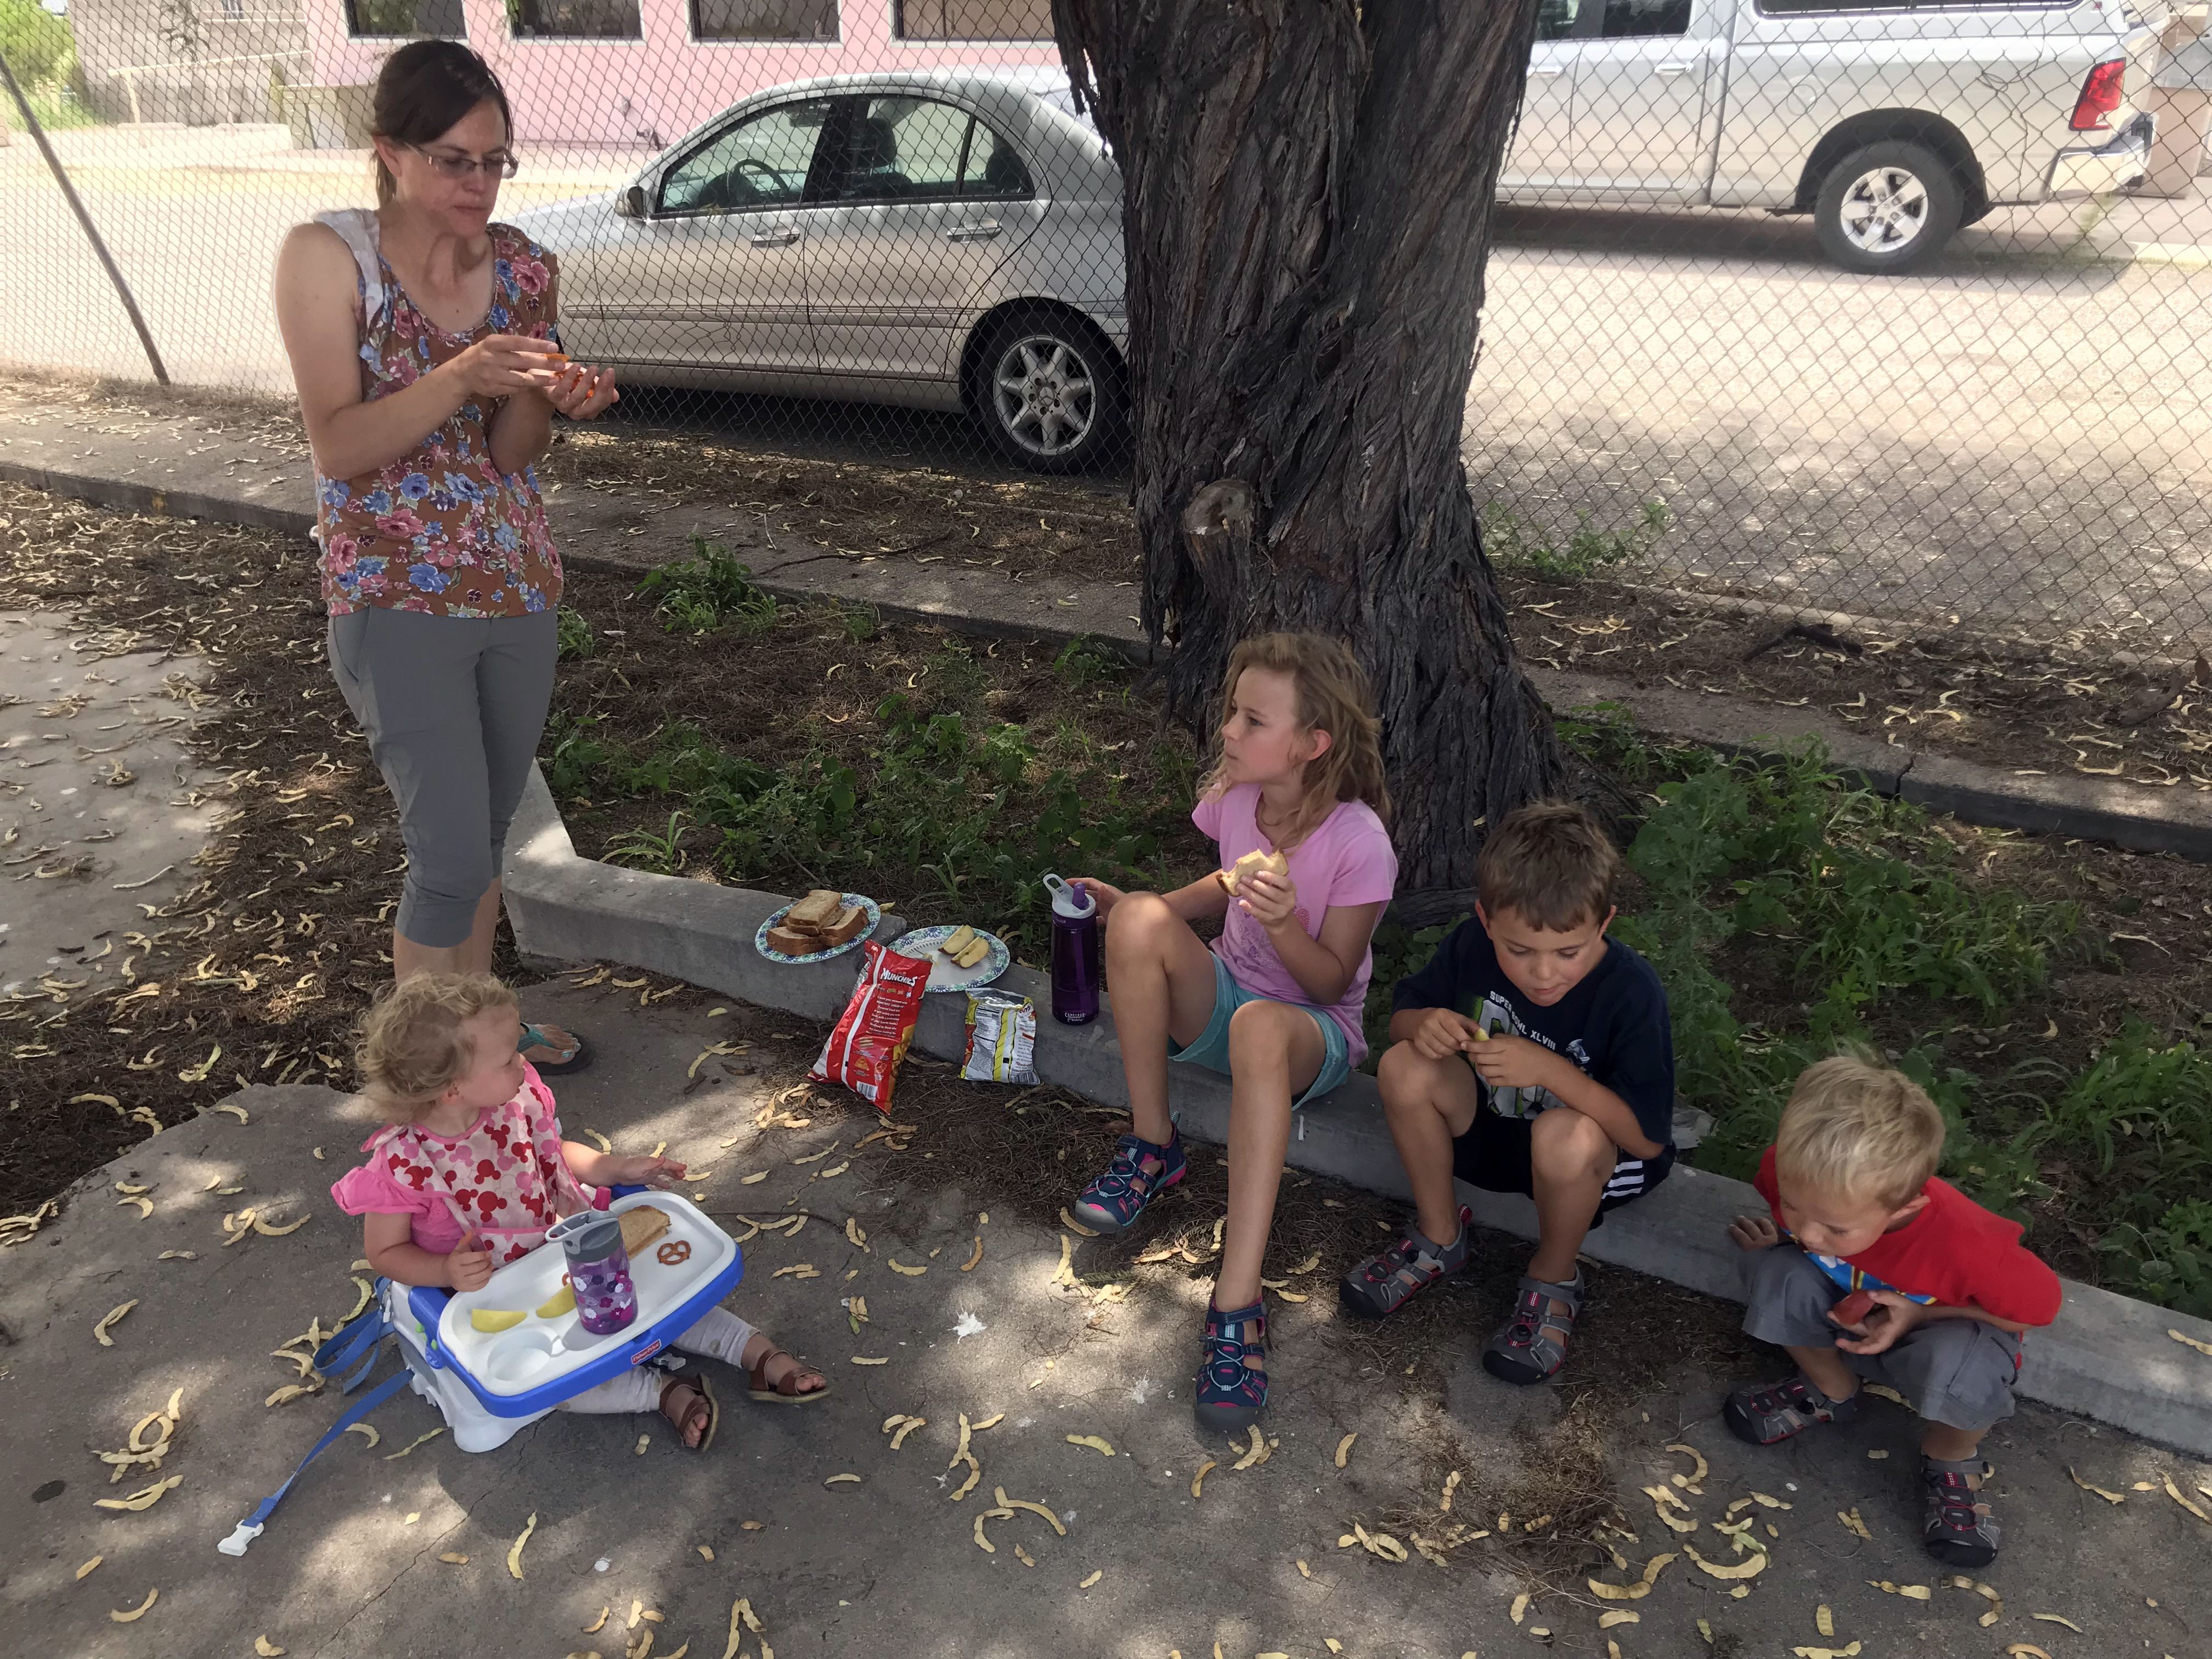 Lily, Amy, Elayne, Titus, and Joel eating curbside (quite literally), enjoying some PB&J at one of our midday stops while on the road!